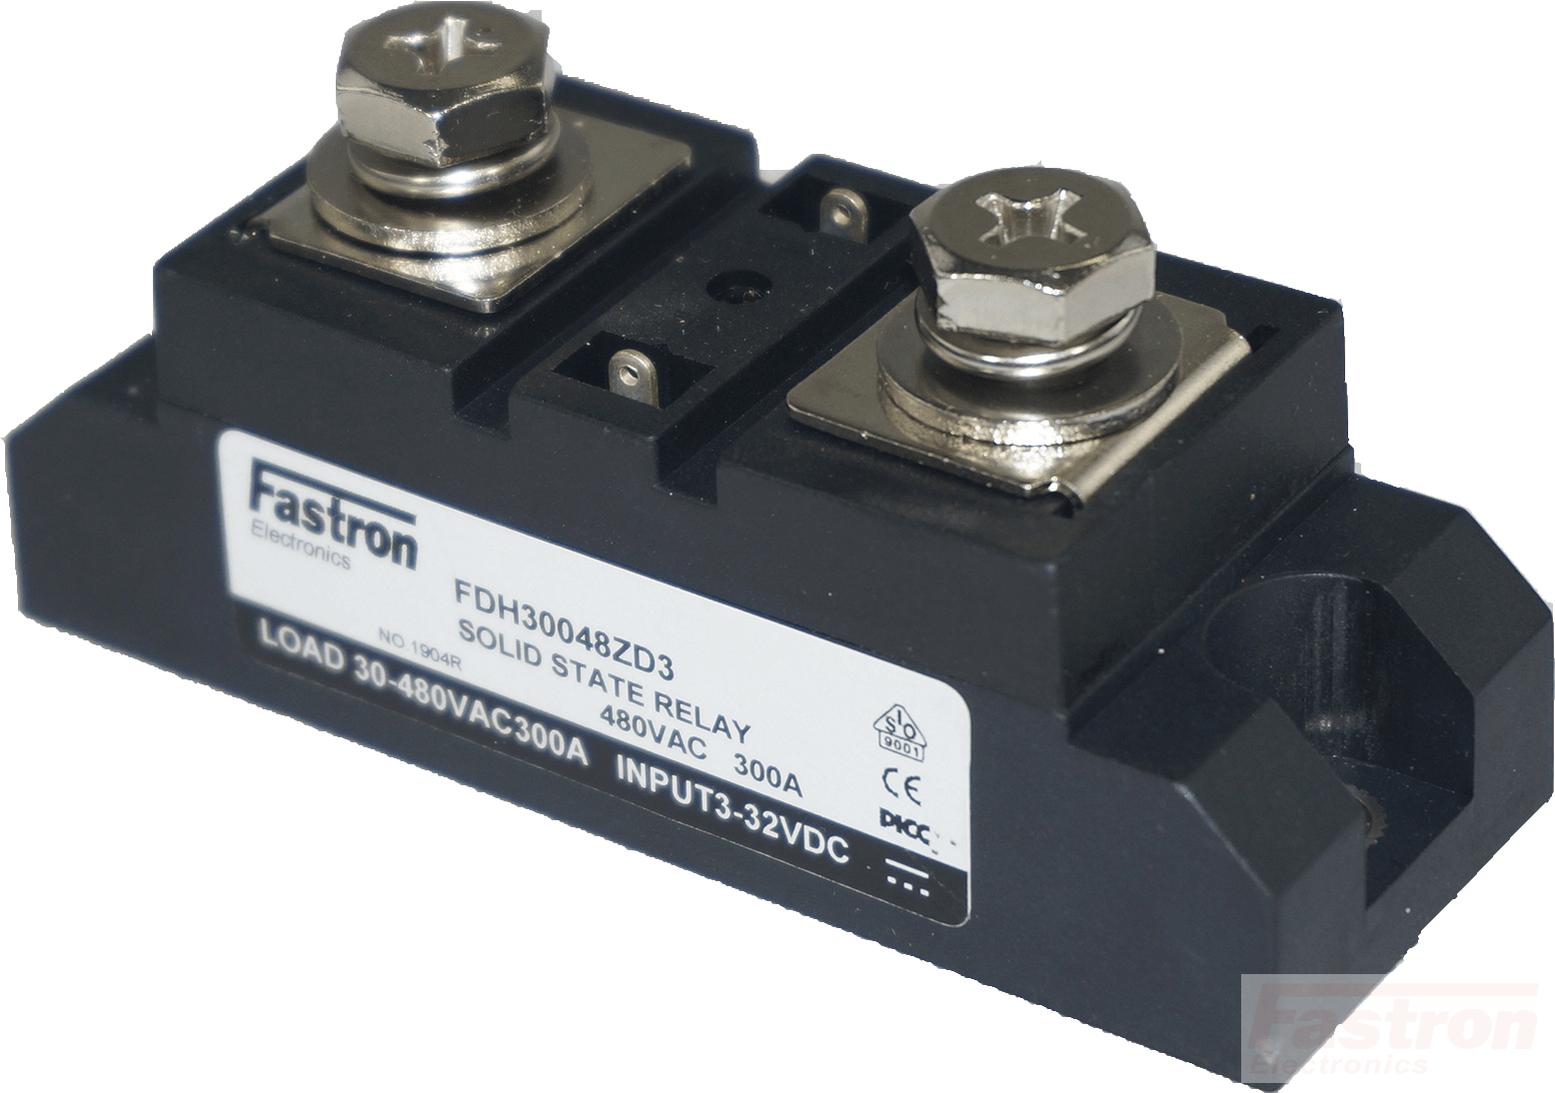 Fastron Electronics Solid State Contactor FDH30048RA4, Solid State Relay, Contactor Style, 480VAC, 300 Amp, 3-32VDC Control, Random Crossing, Panel Mount FE-FDH30048RA4